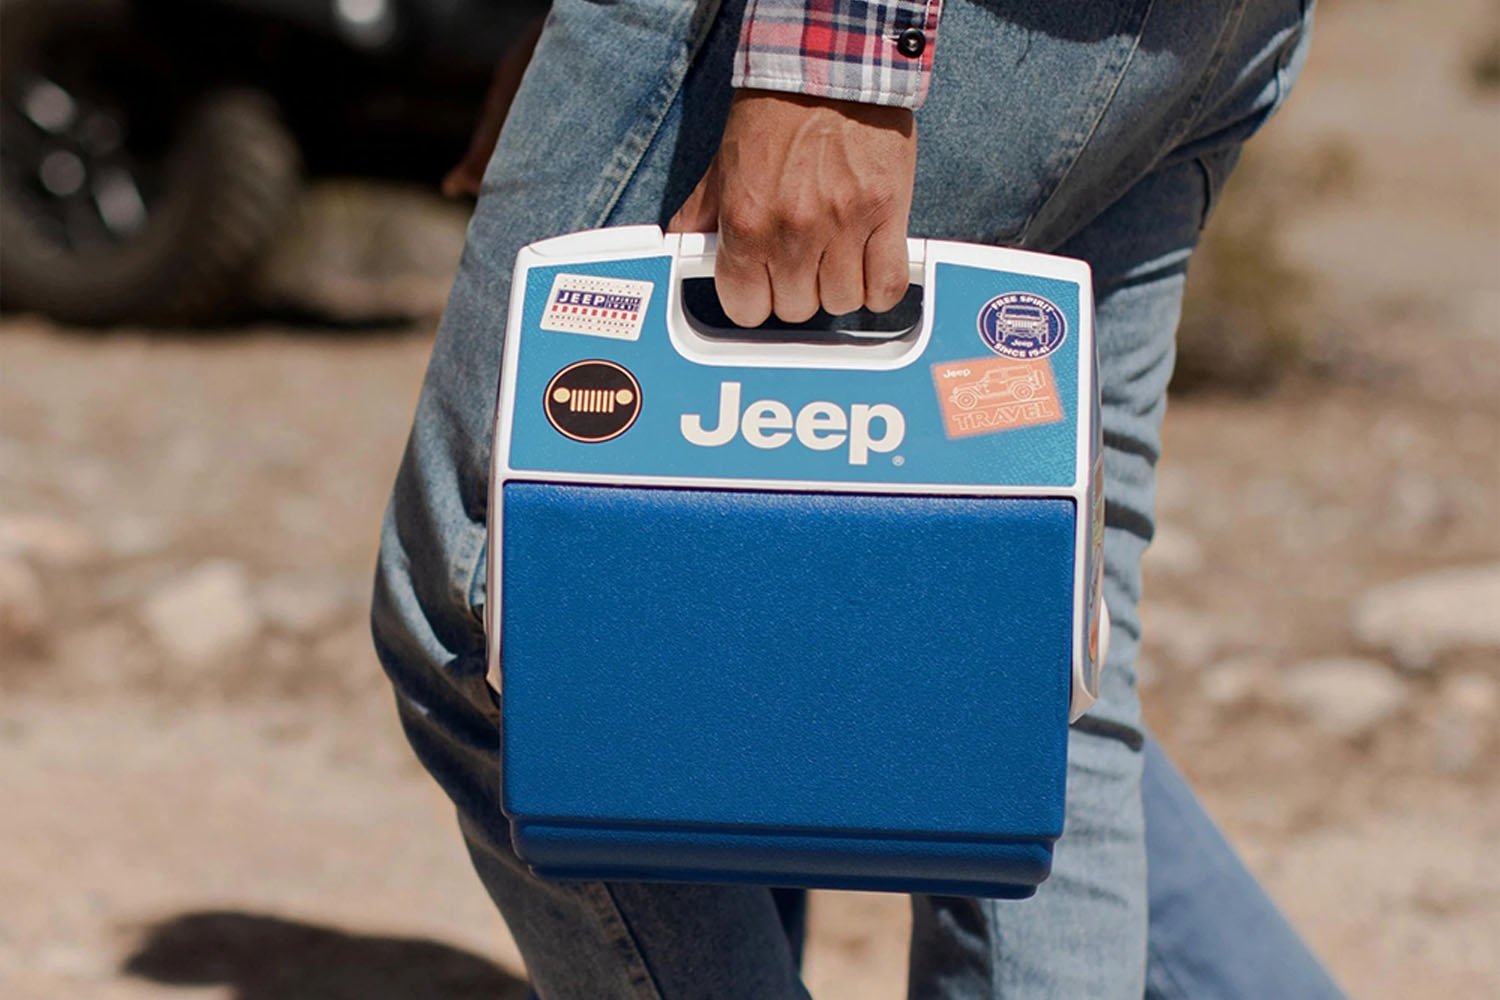 an Igloo cooler with the Jeep brand owned by a model